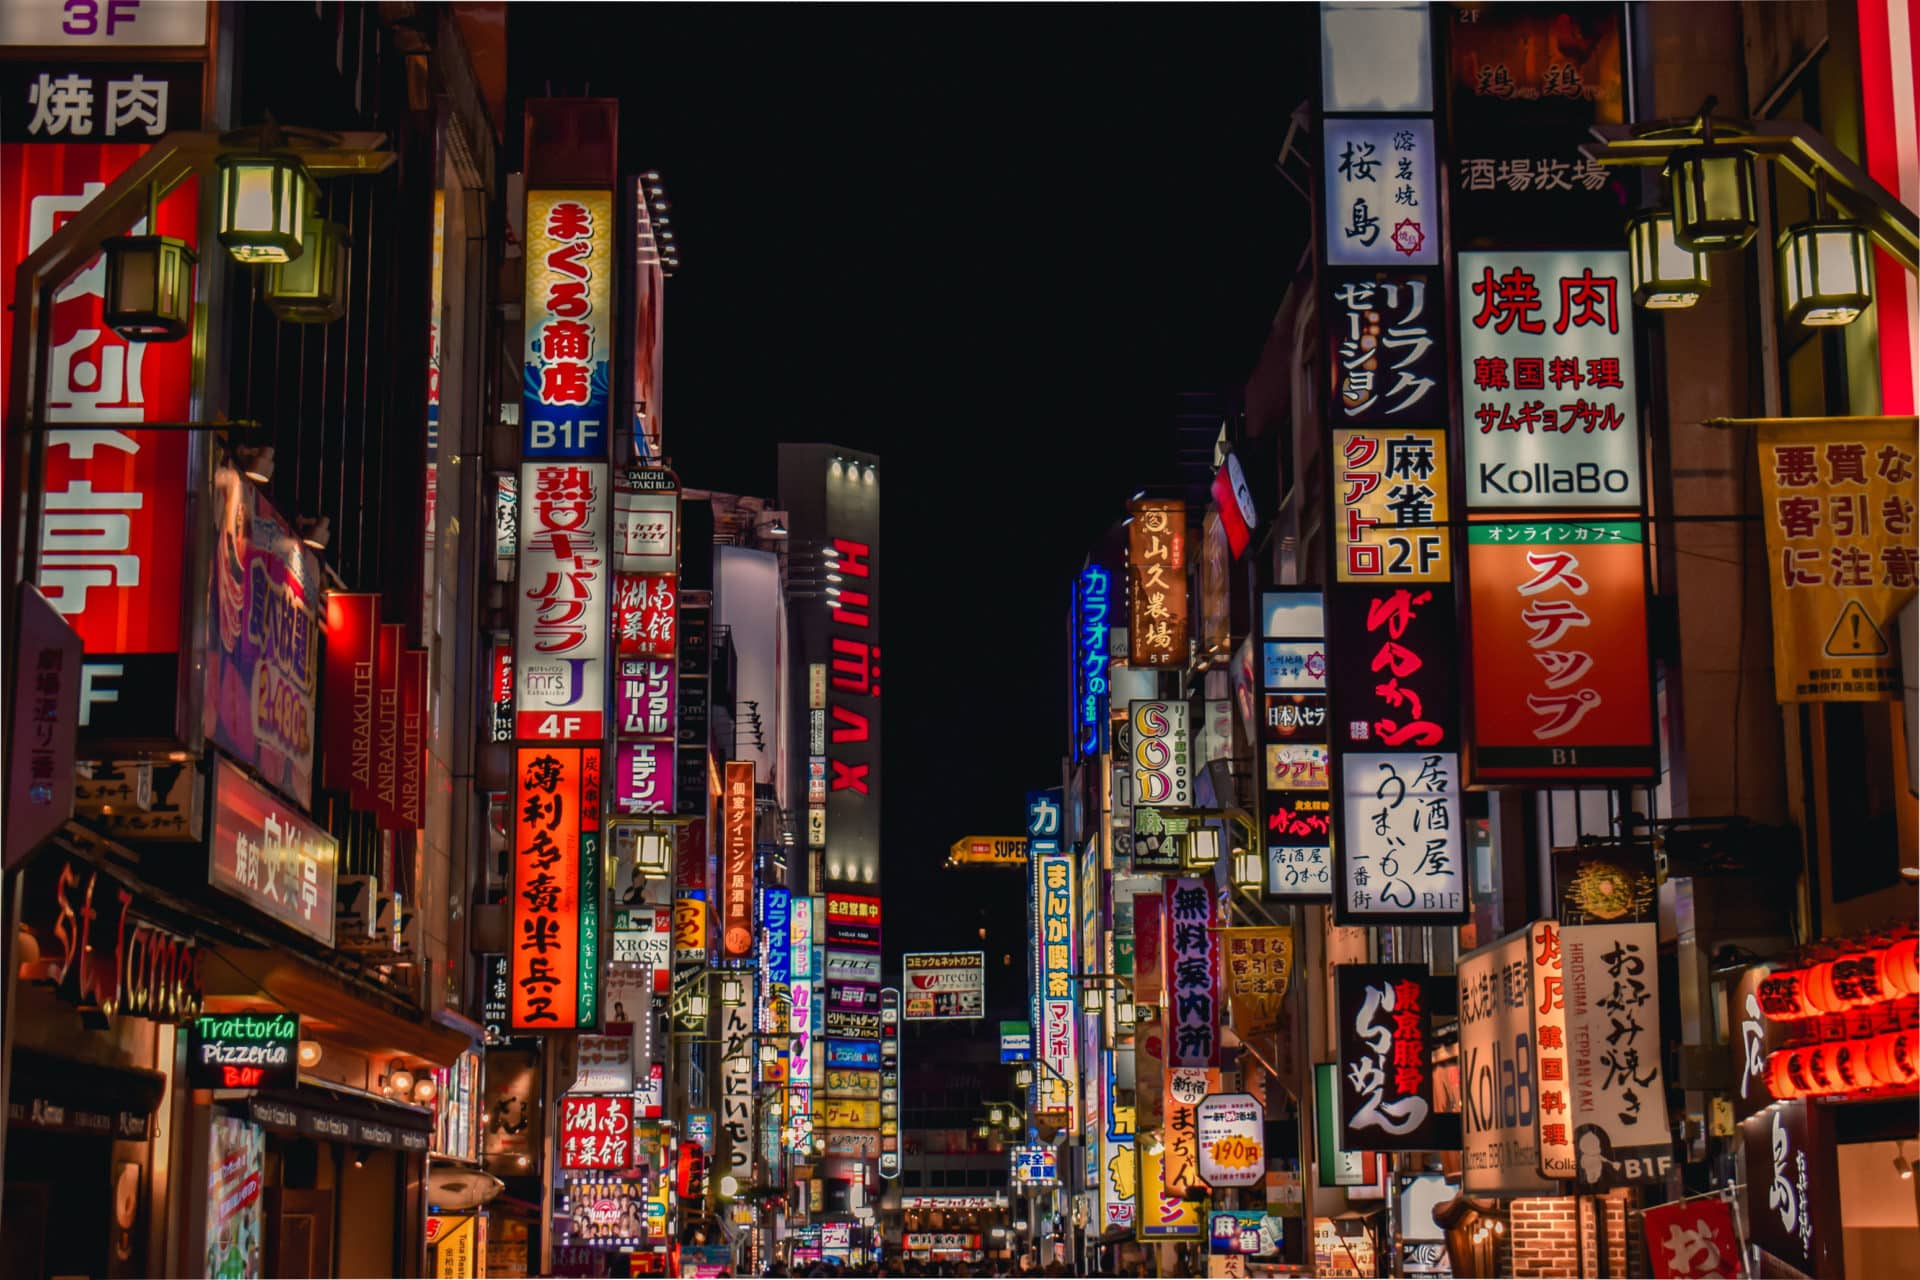 Tokyi: a great destination for solo travellers